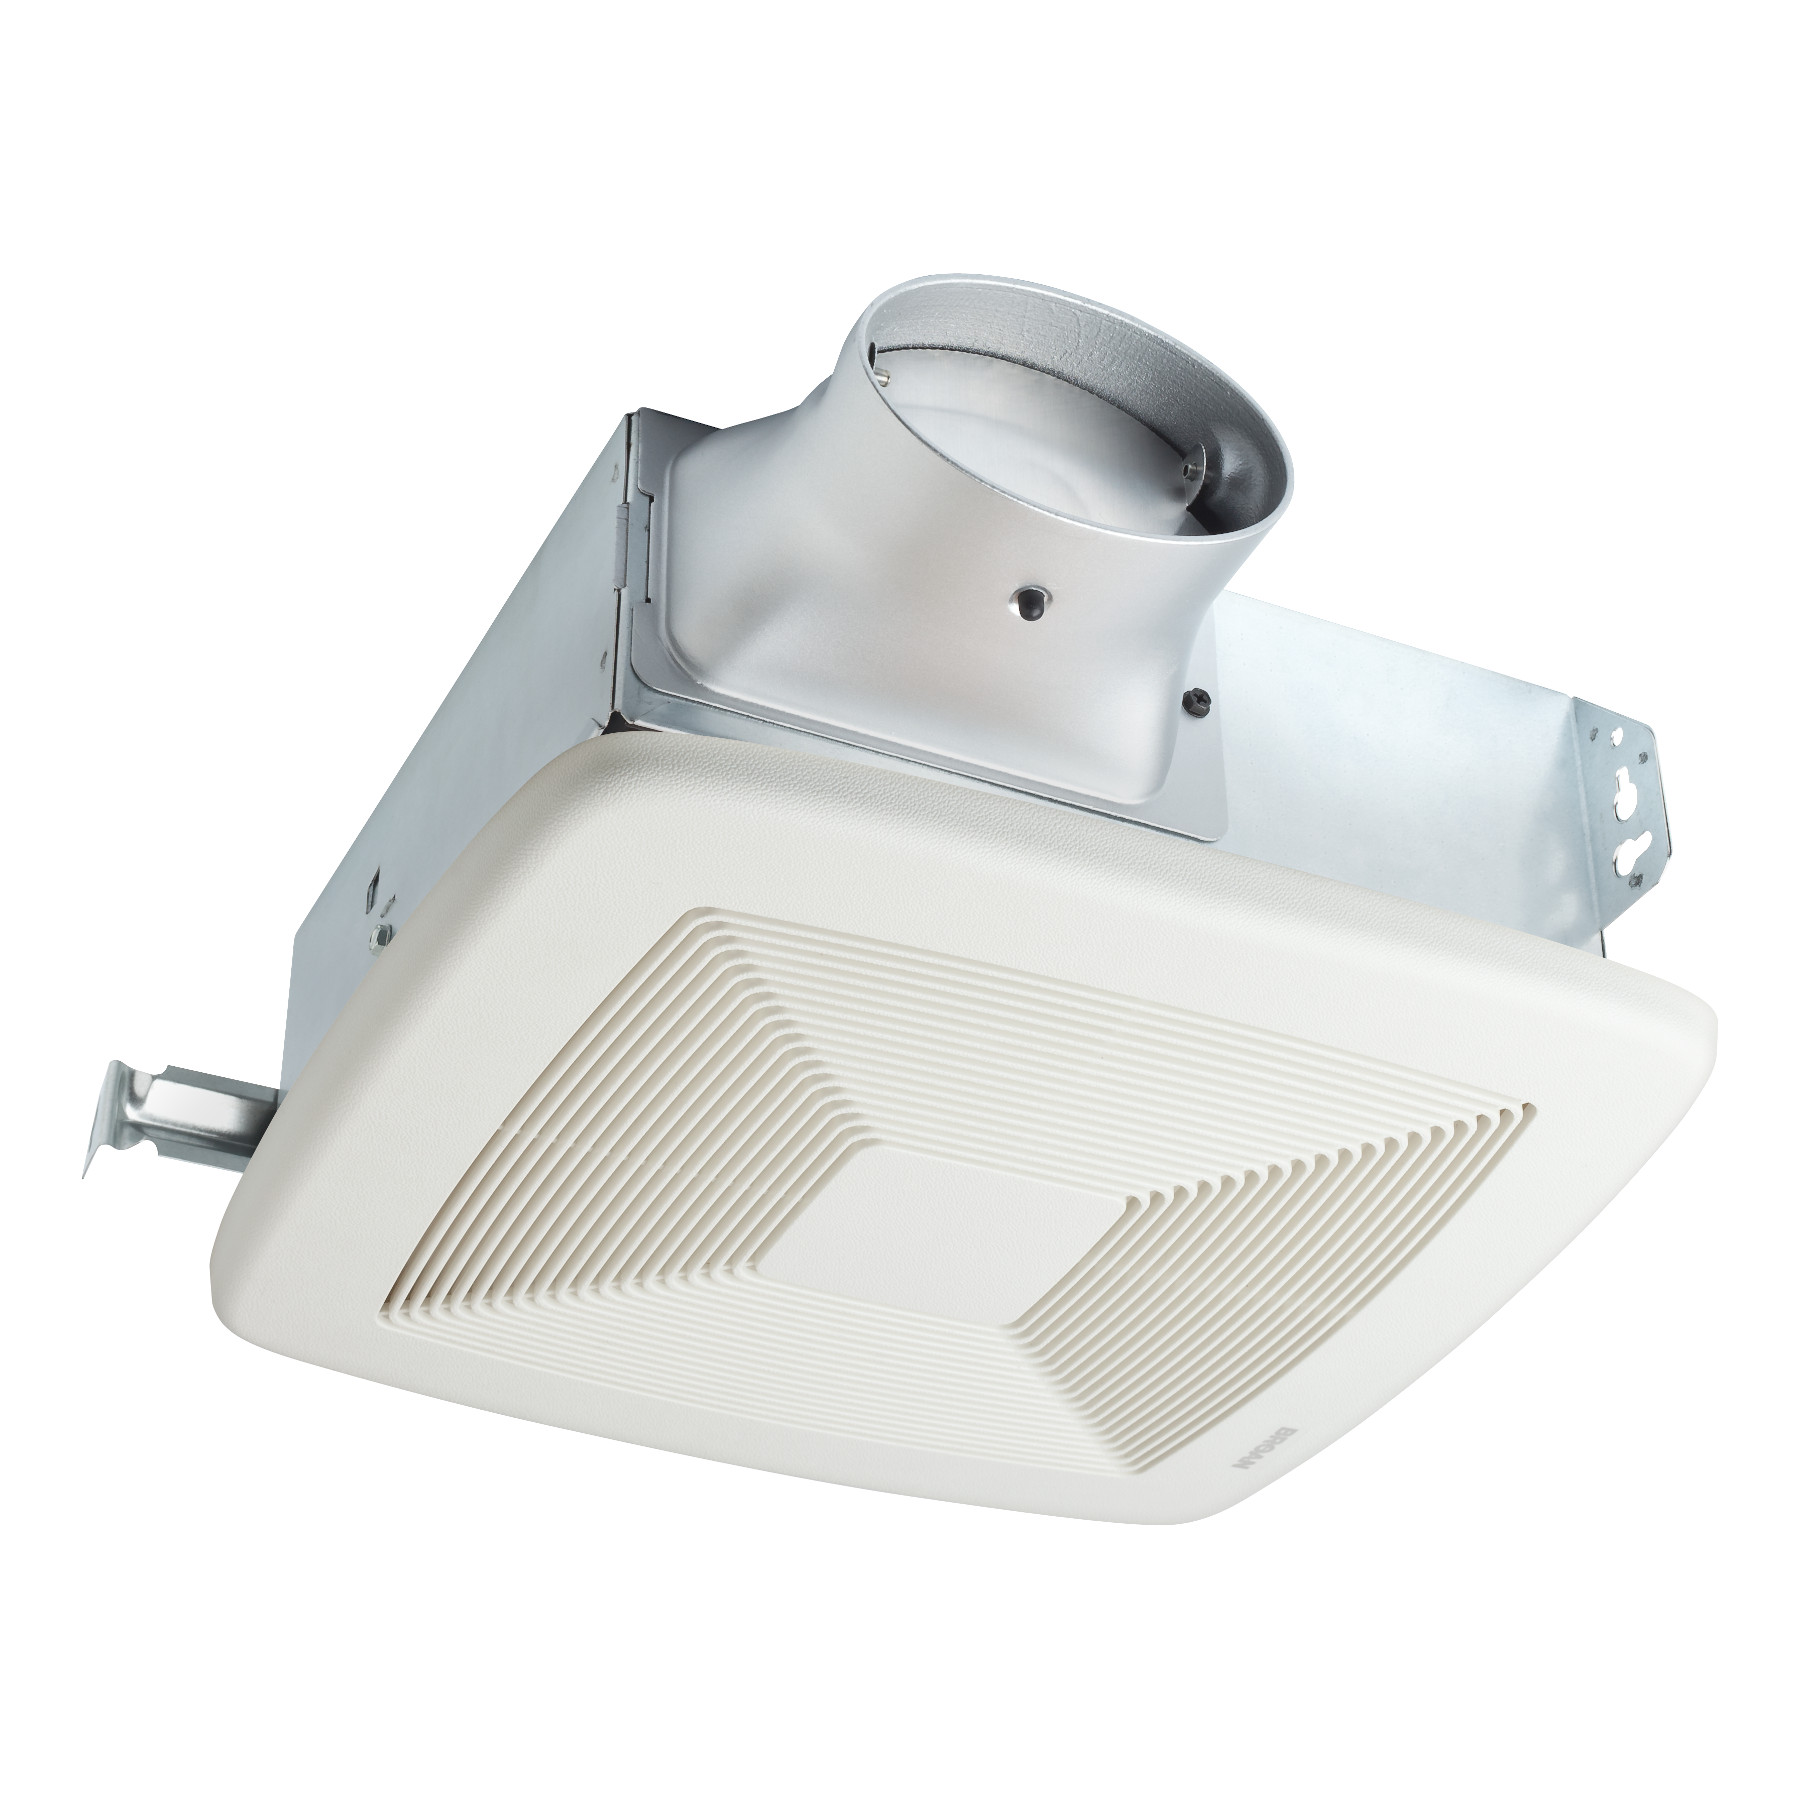 LoProfile 110 CFM Ceiling/Wall Exhaust Fan for Bathroom or Garage with 4 in. Oval Duct, ENERGY STAR*